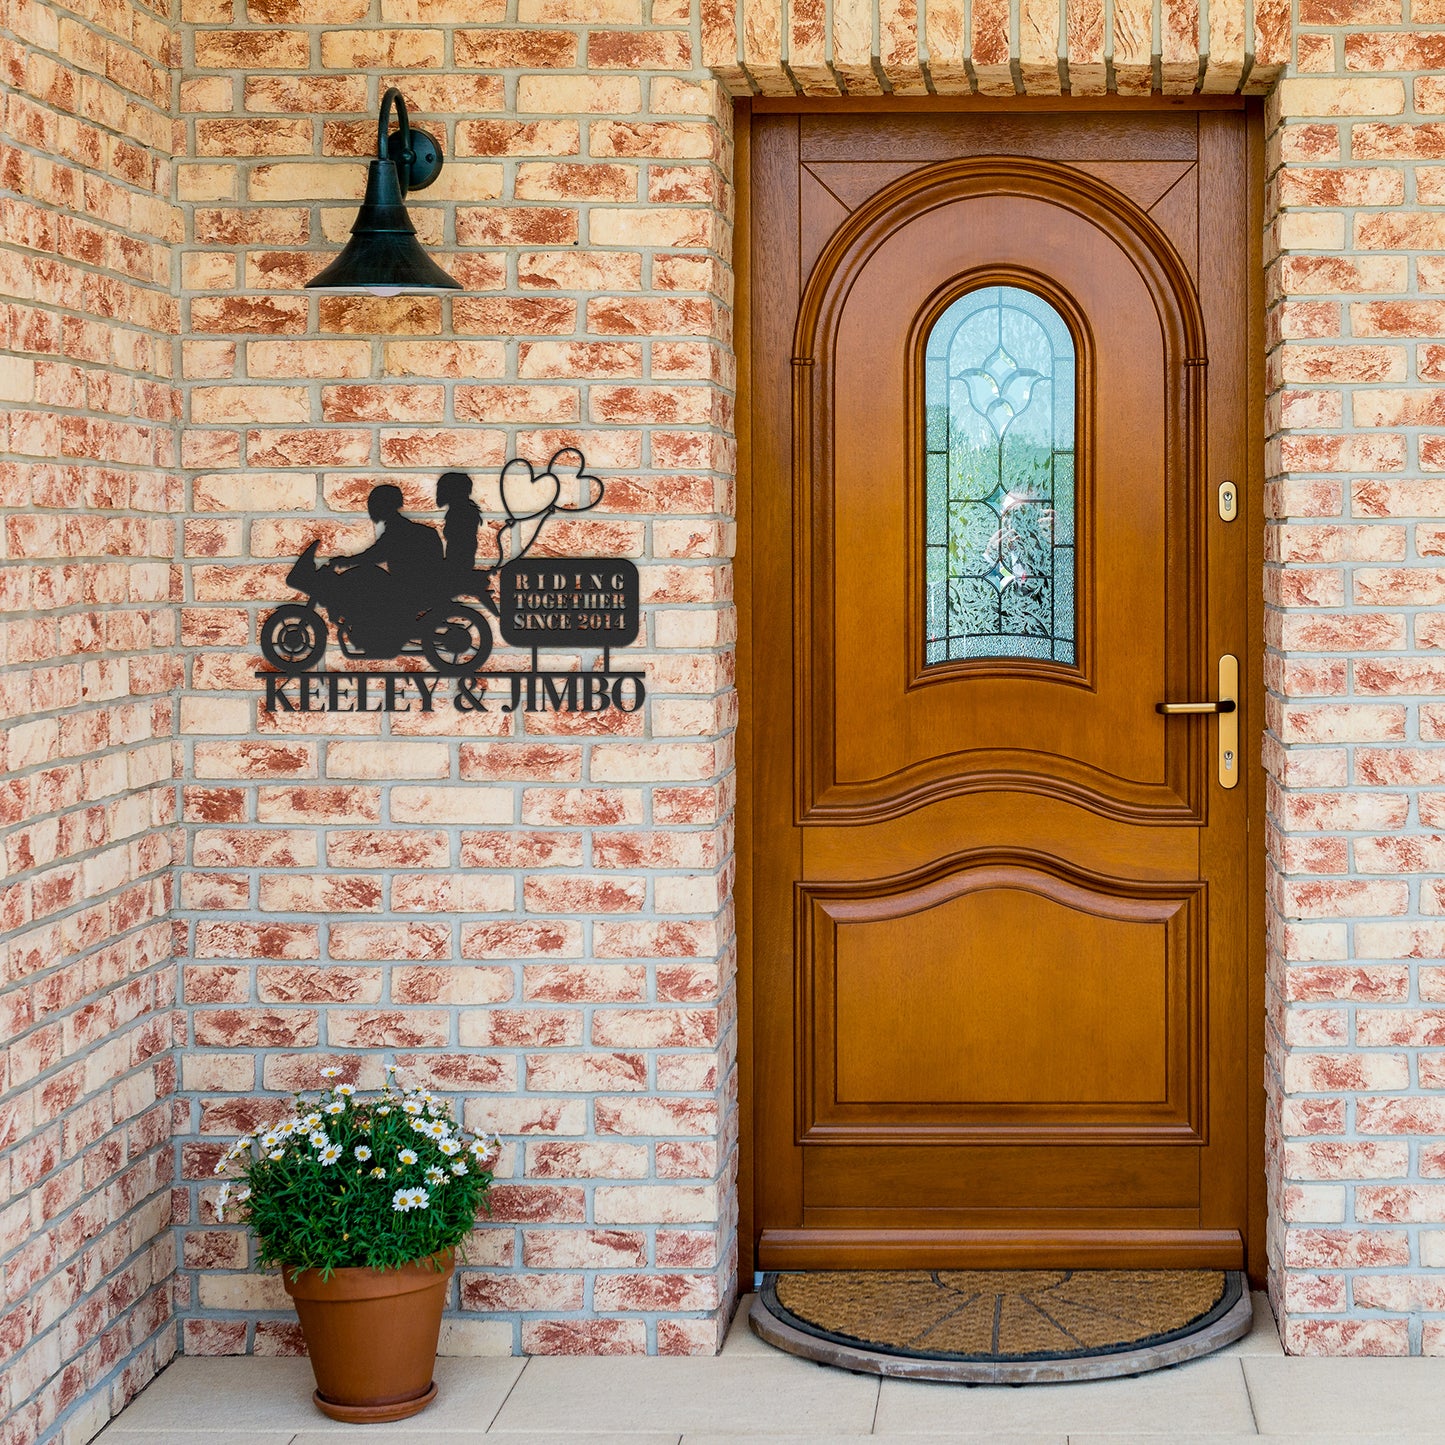 A wooden front door with a stained glass window, next to a brick wall with Custom Motorcycle Couple Metal Wall Art and a potted plant.